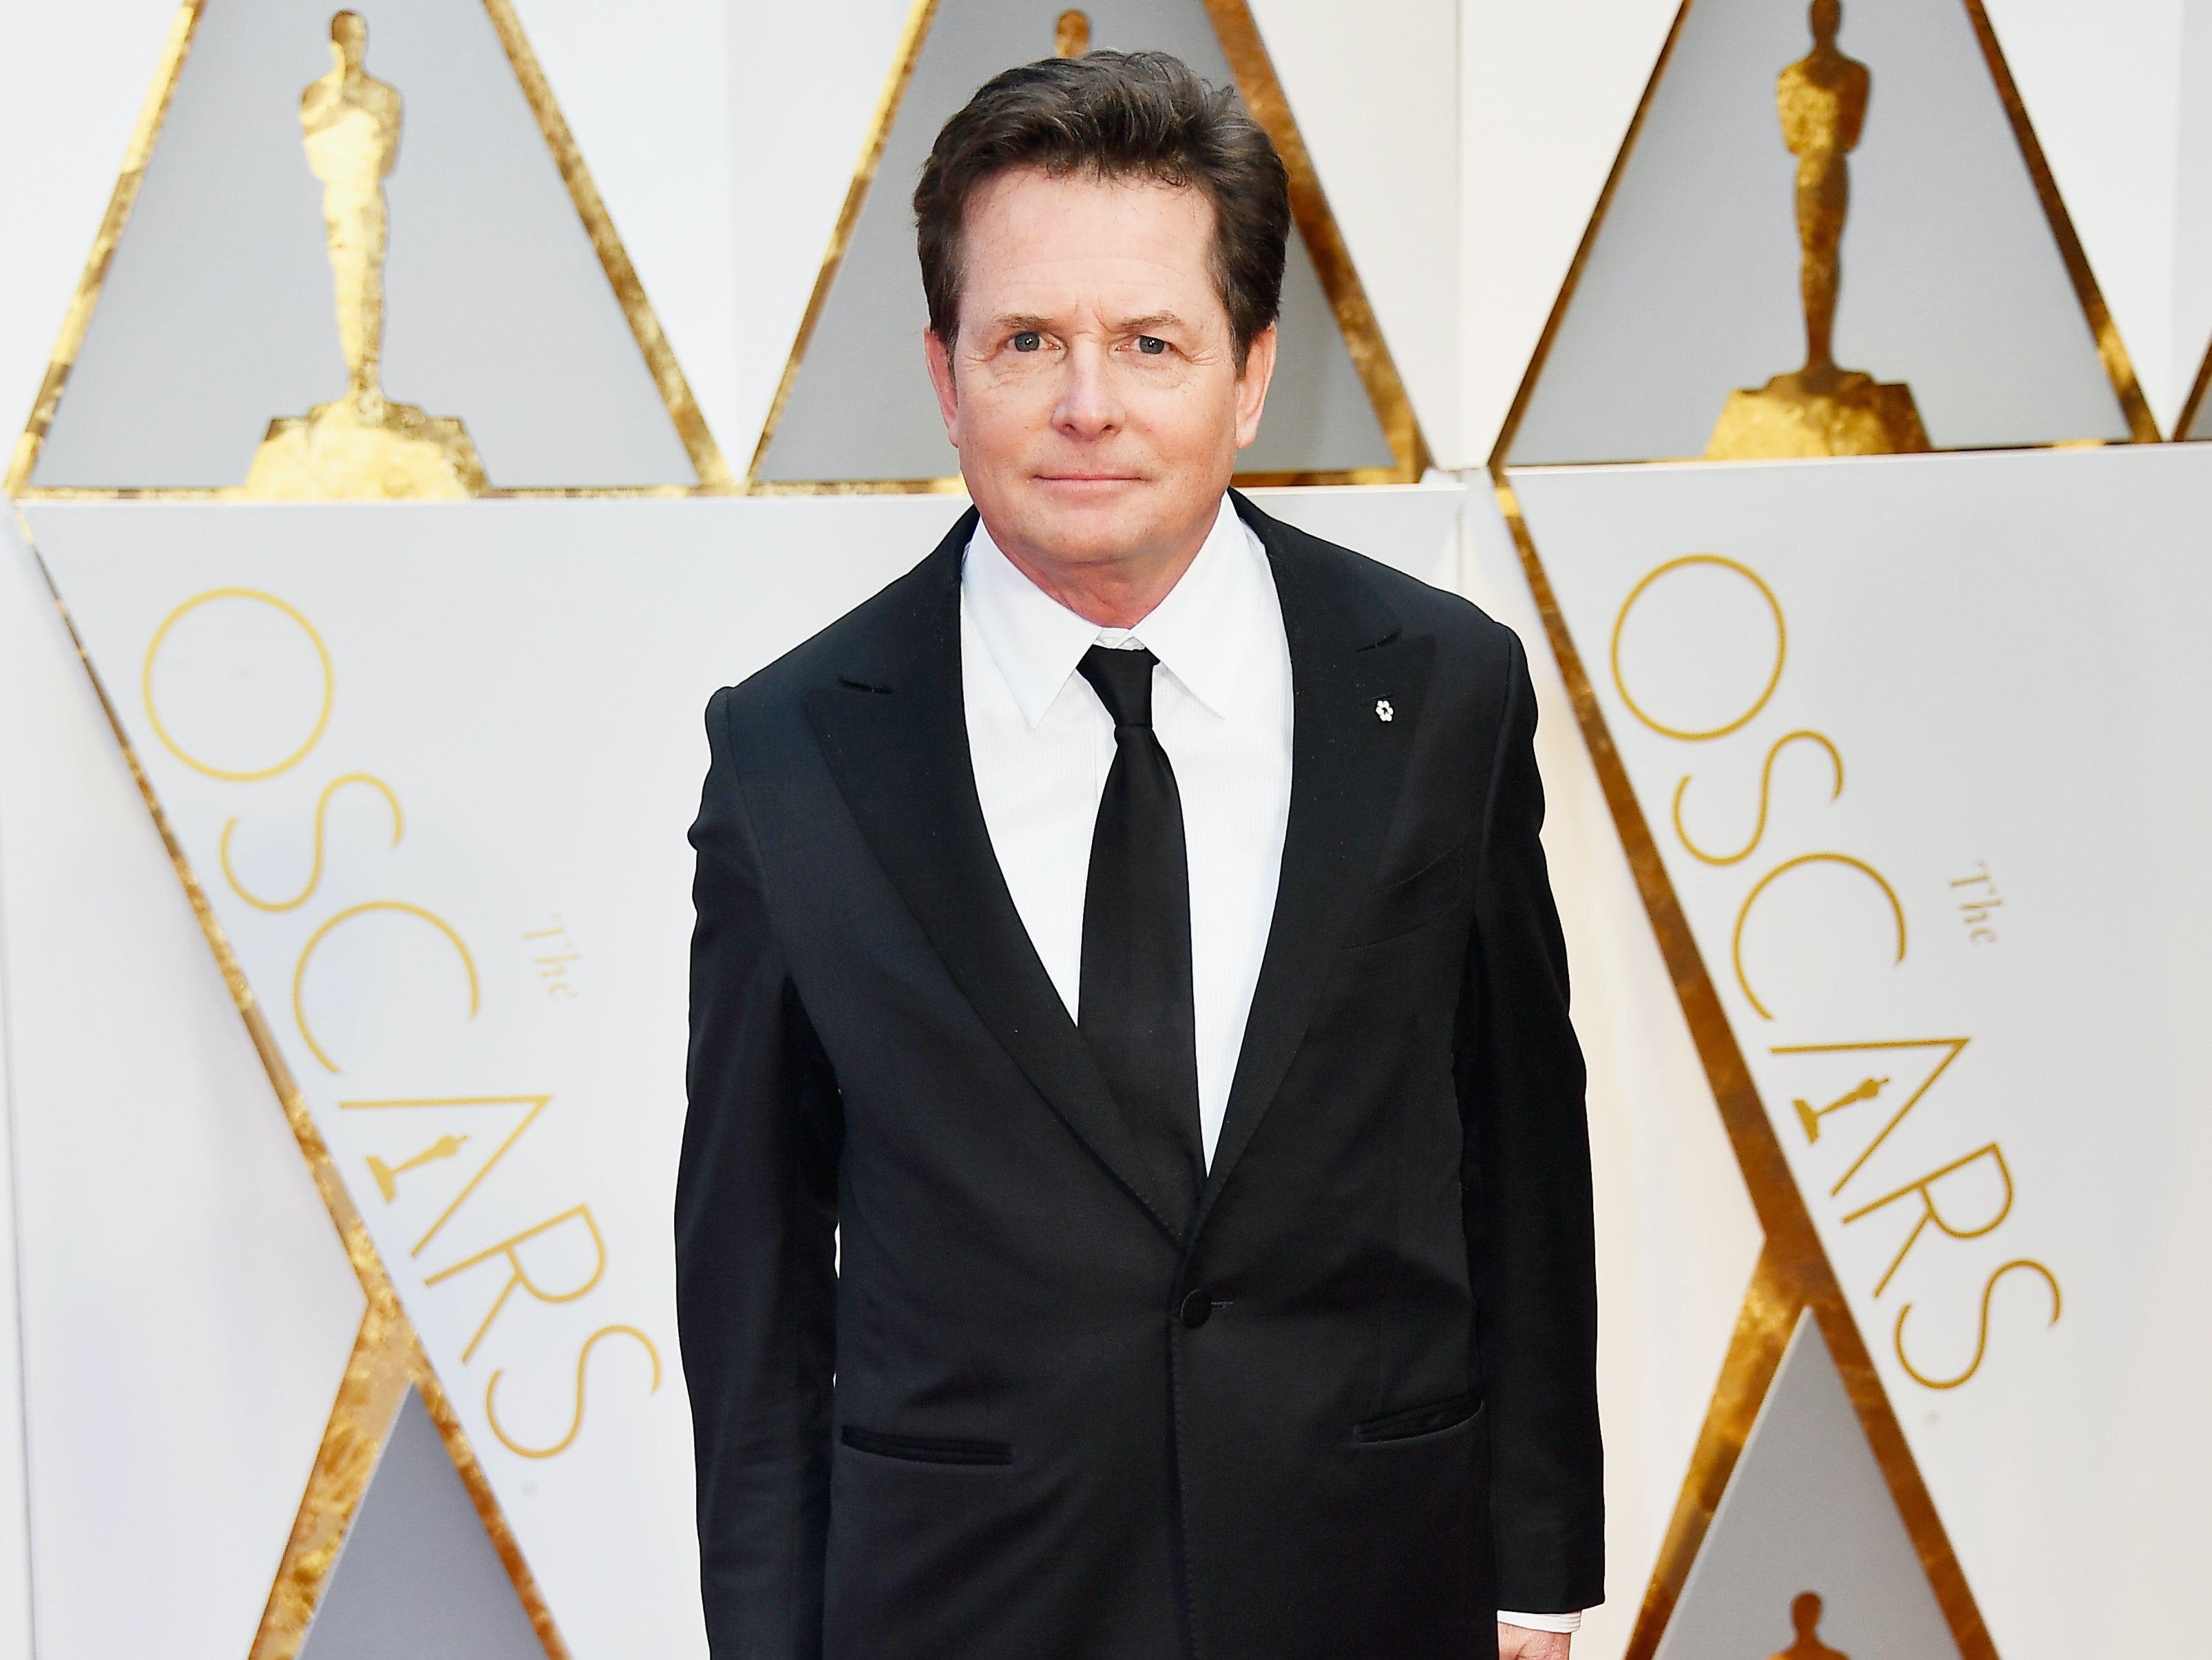 Michael J Fox opens up about ‘darkest moment’ of battle with Parkinson’s